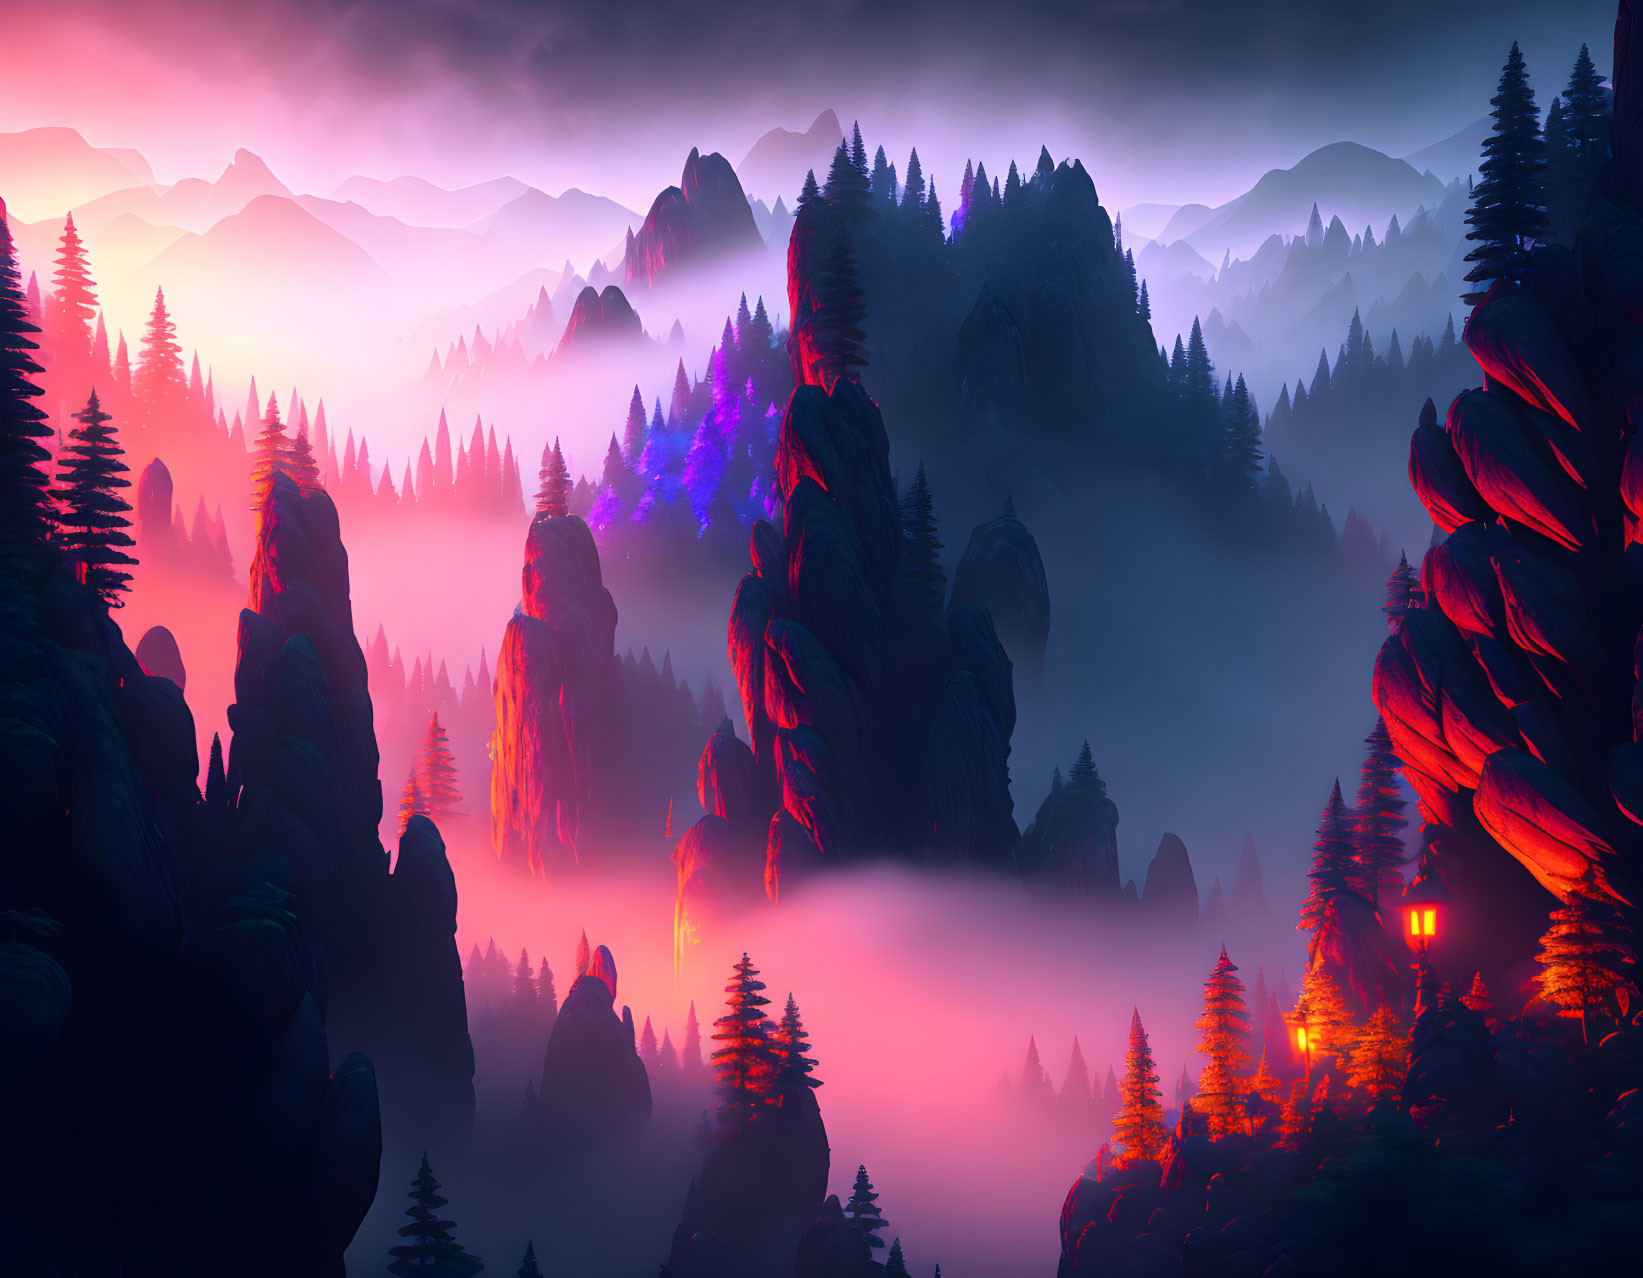 Colorful Digital Landscape Featuring Purple and Red Hues Over Mountains, Trees, and Spires